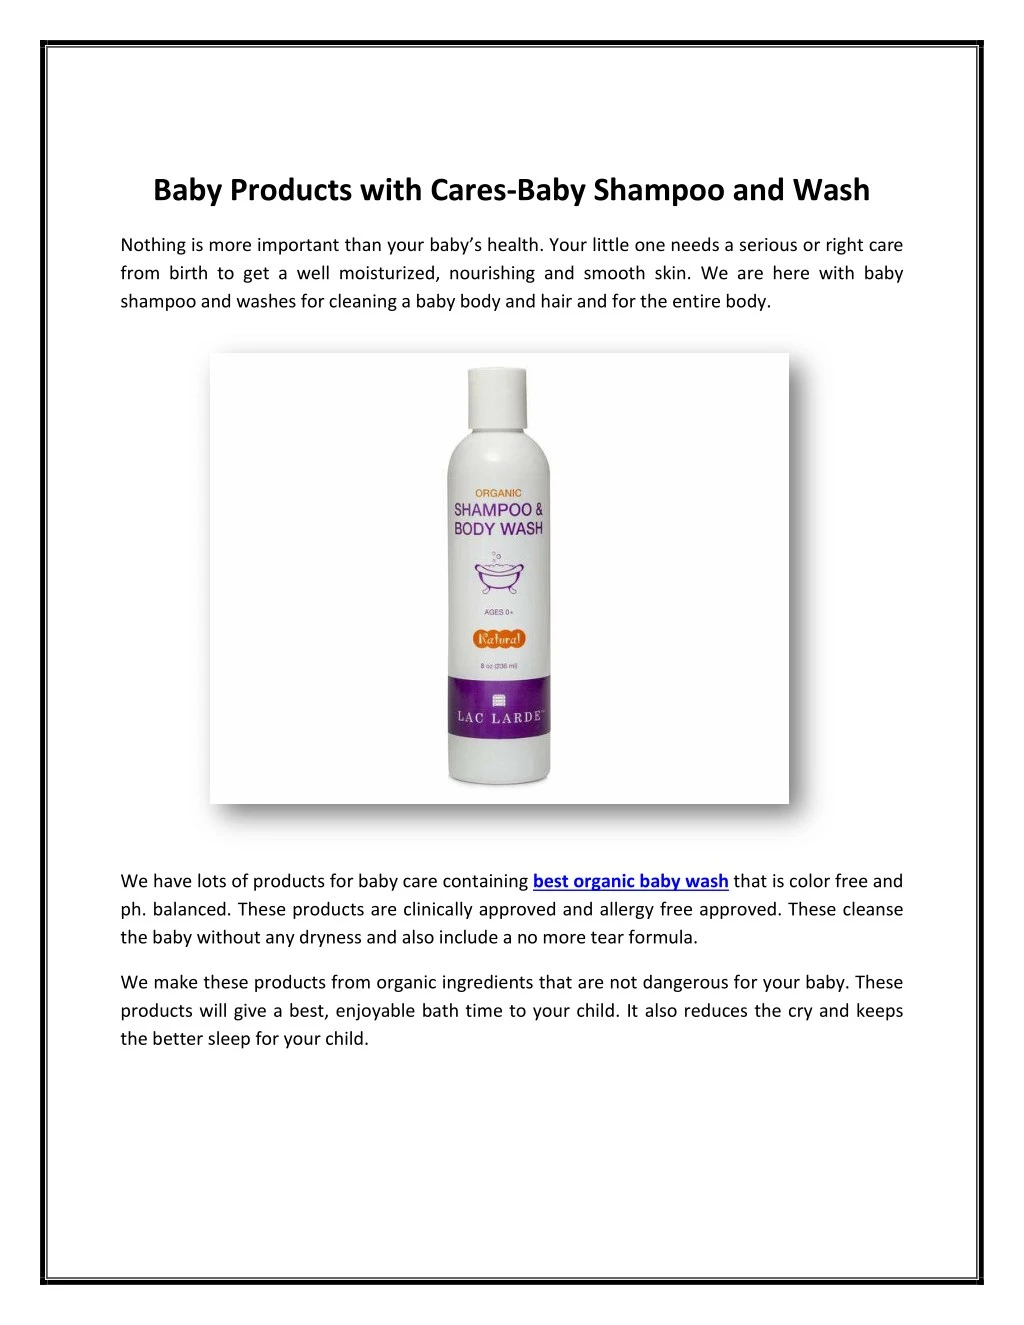 baby products with cares baby shampoo and wash